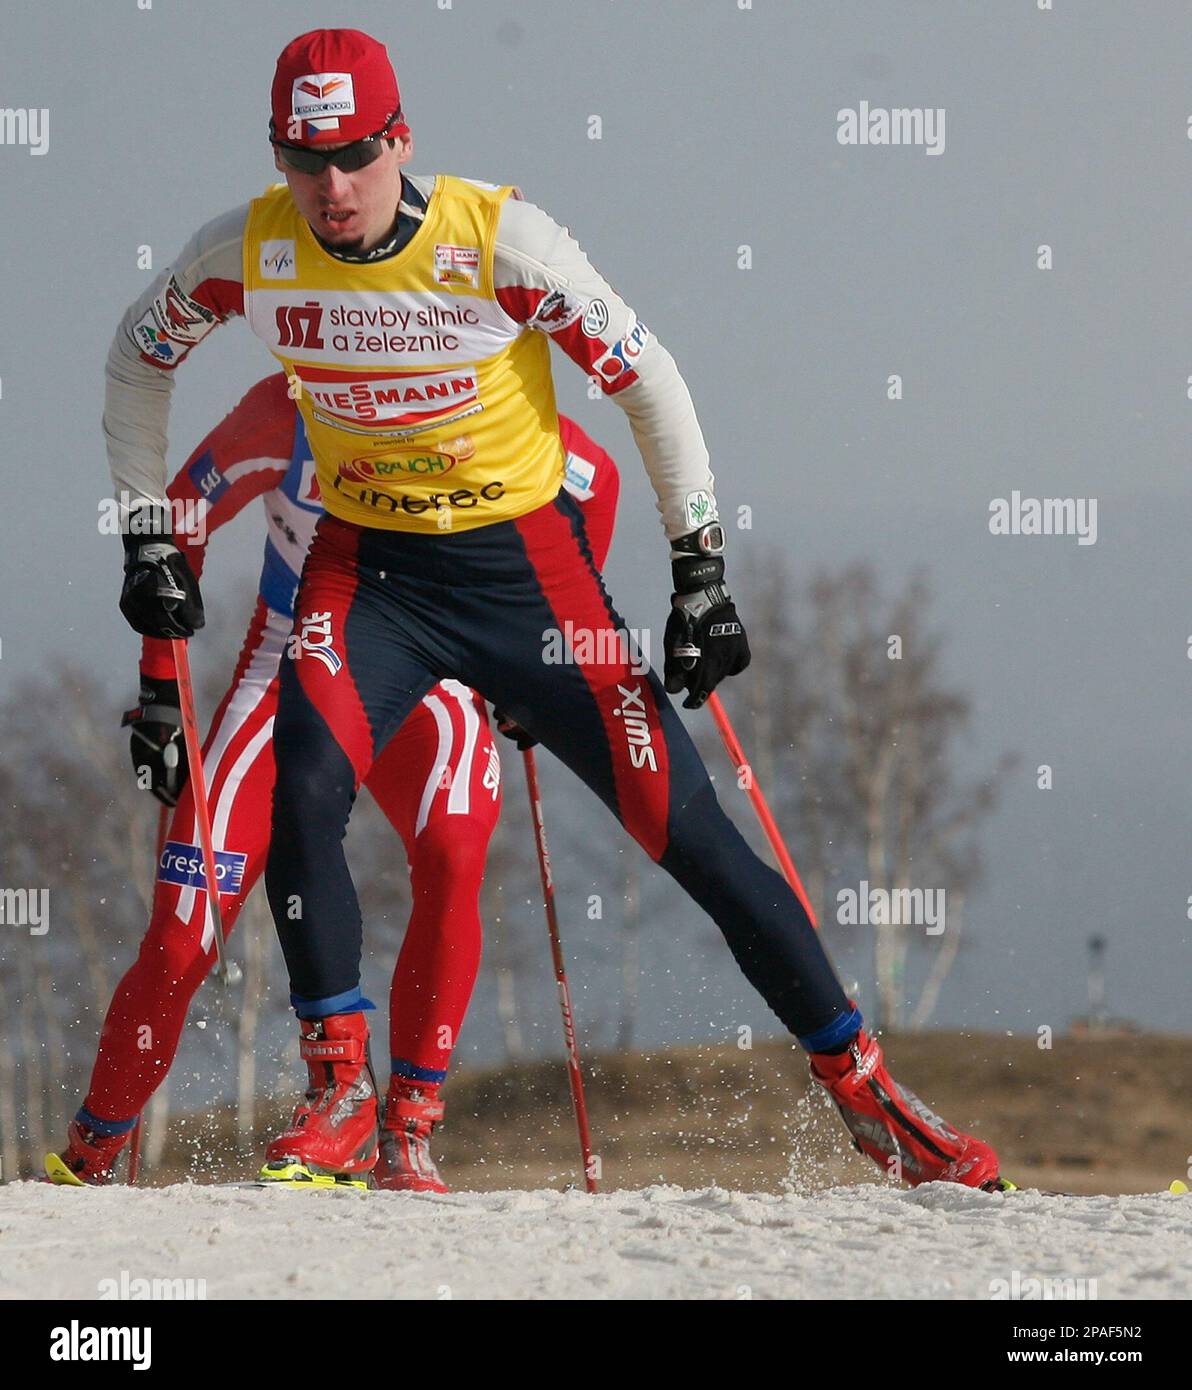 Lukas Bauer from Czech Republic competes during the FIS cross country Mens 11.4 km World Cup event in Liberec, Czech Republic, Saturday, Feb